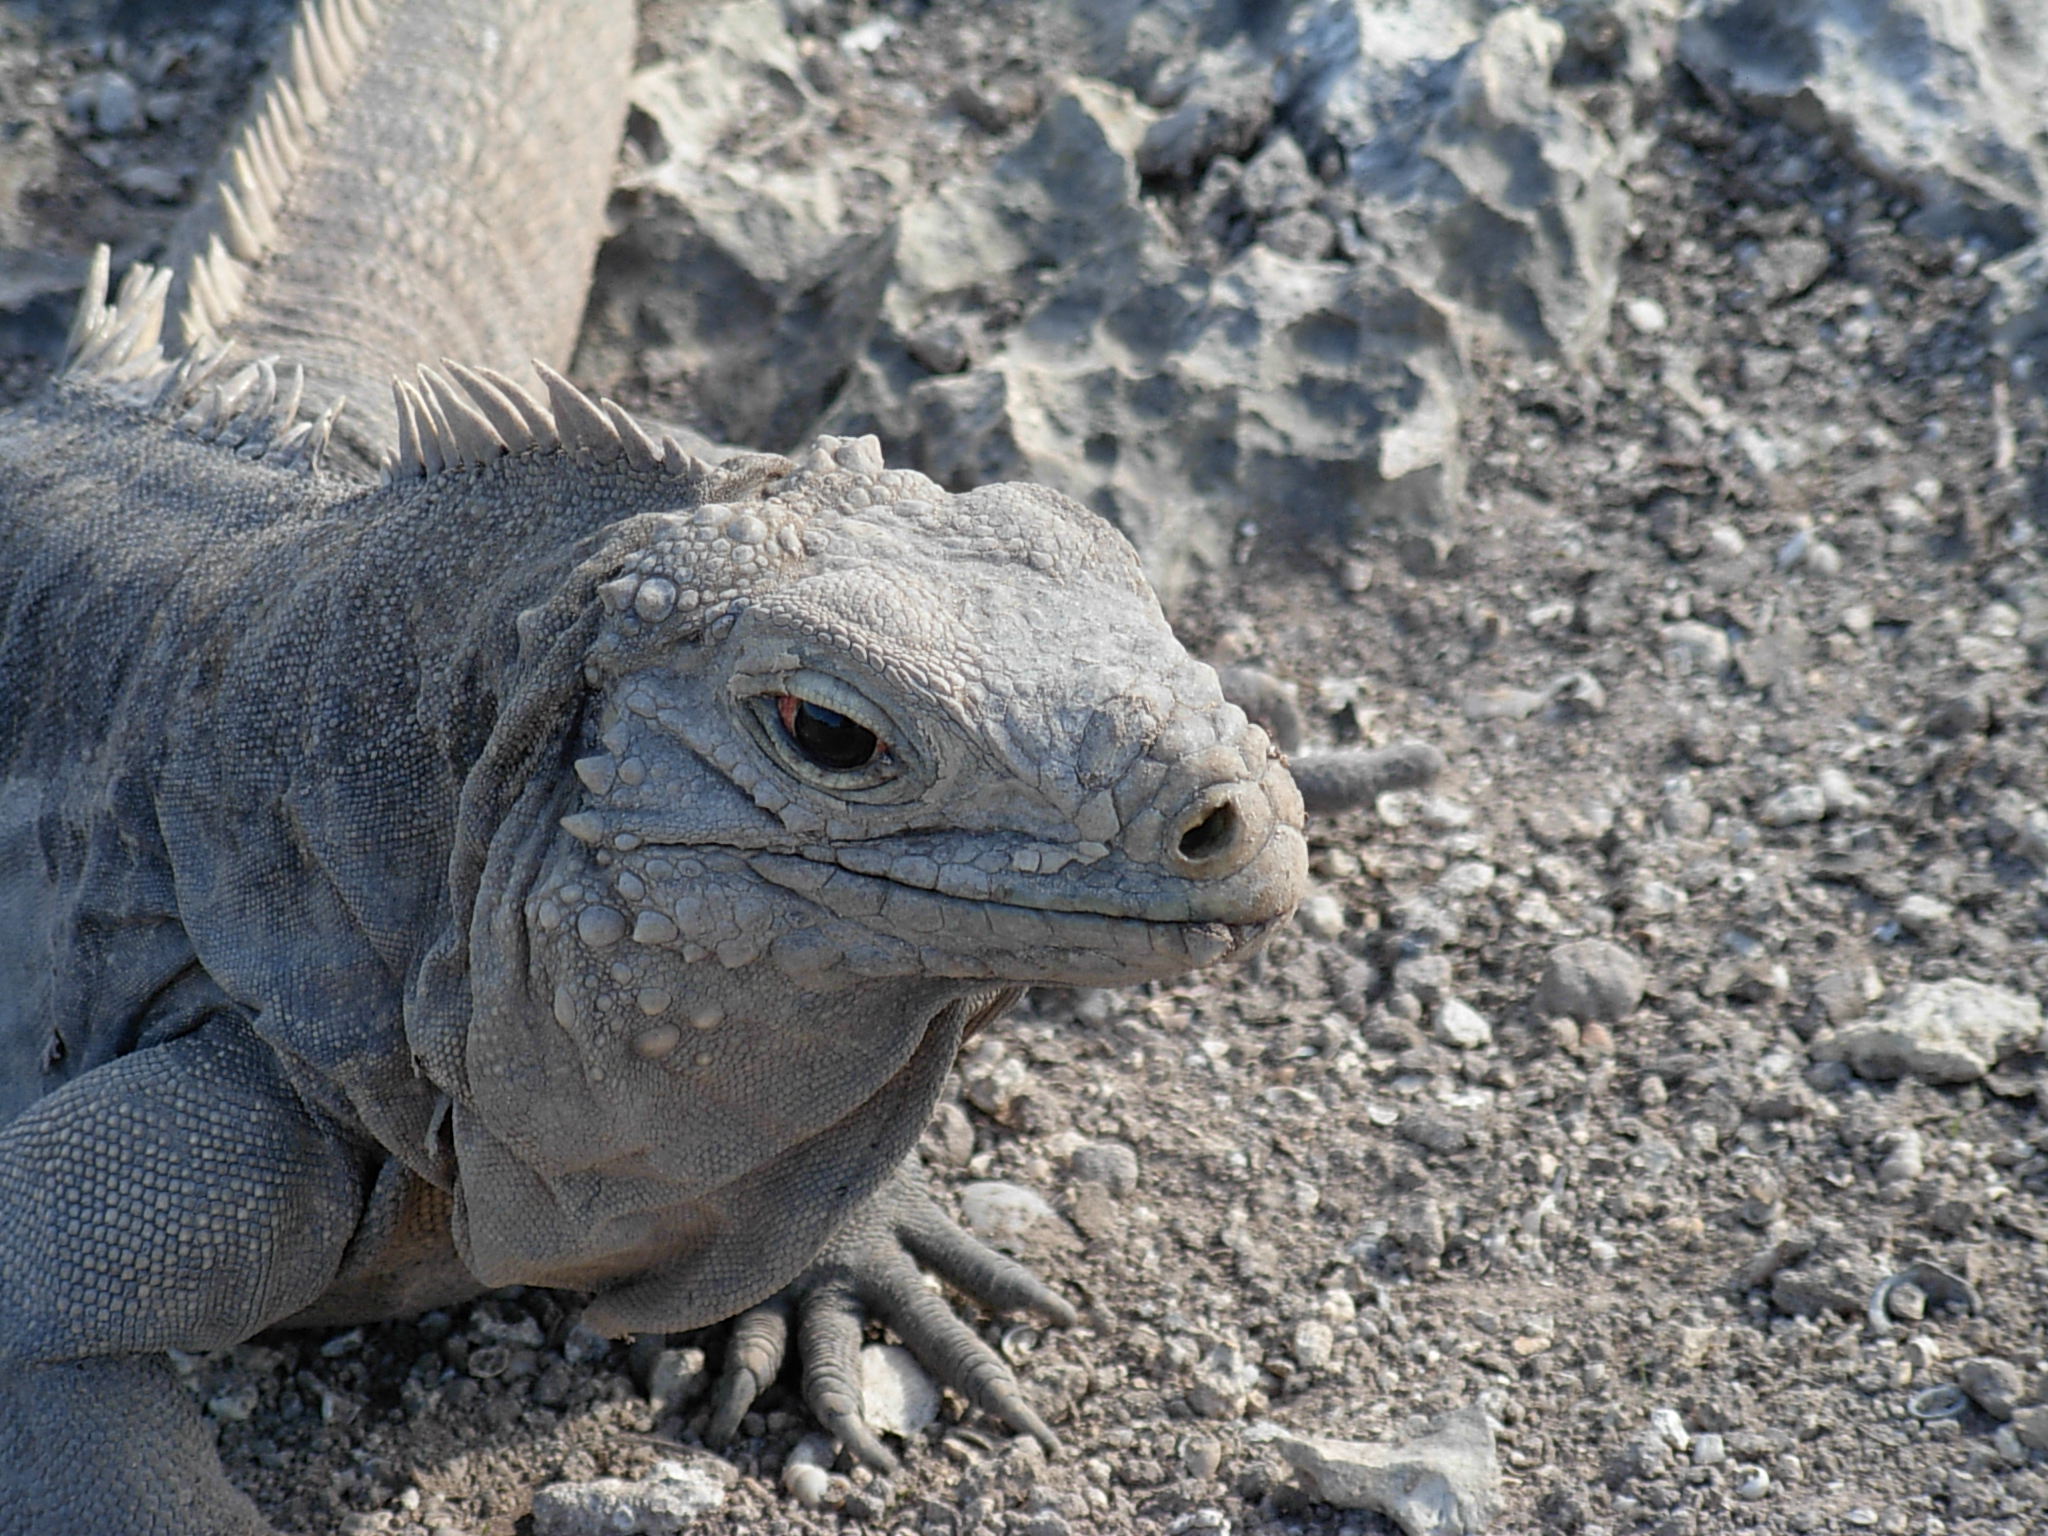 a large lizard sitting on the ground